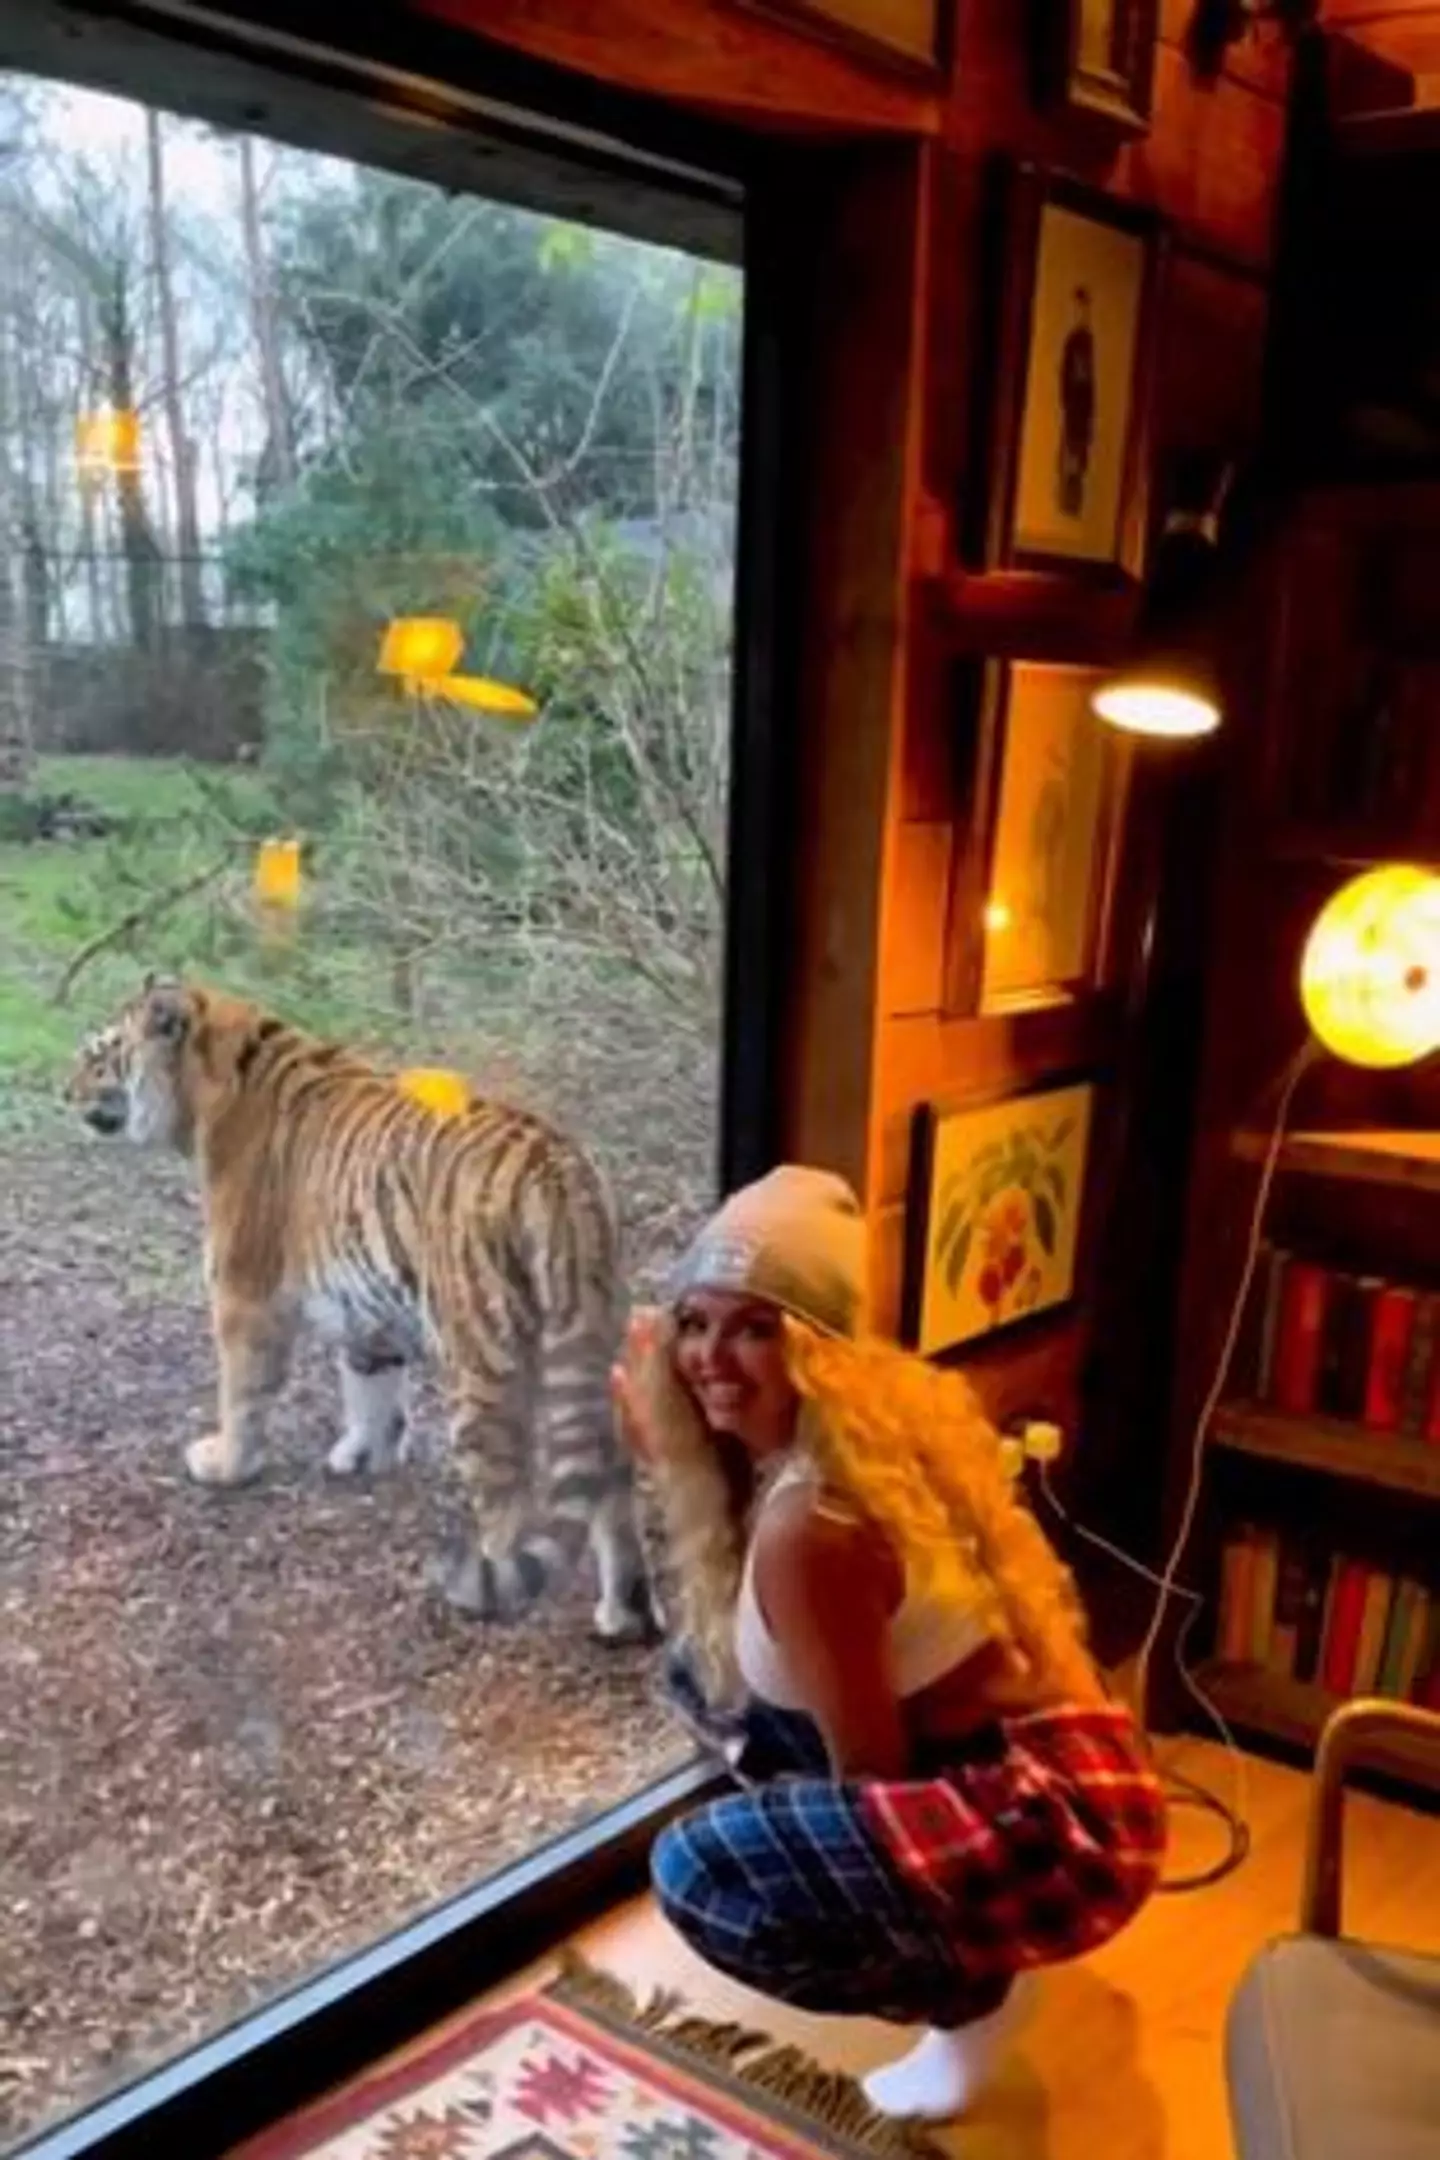 Jesy had been playing with the big cat moments before it pounced.